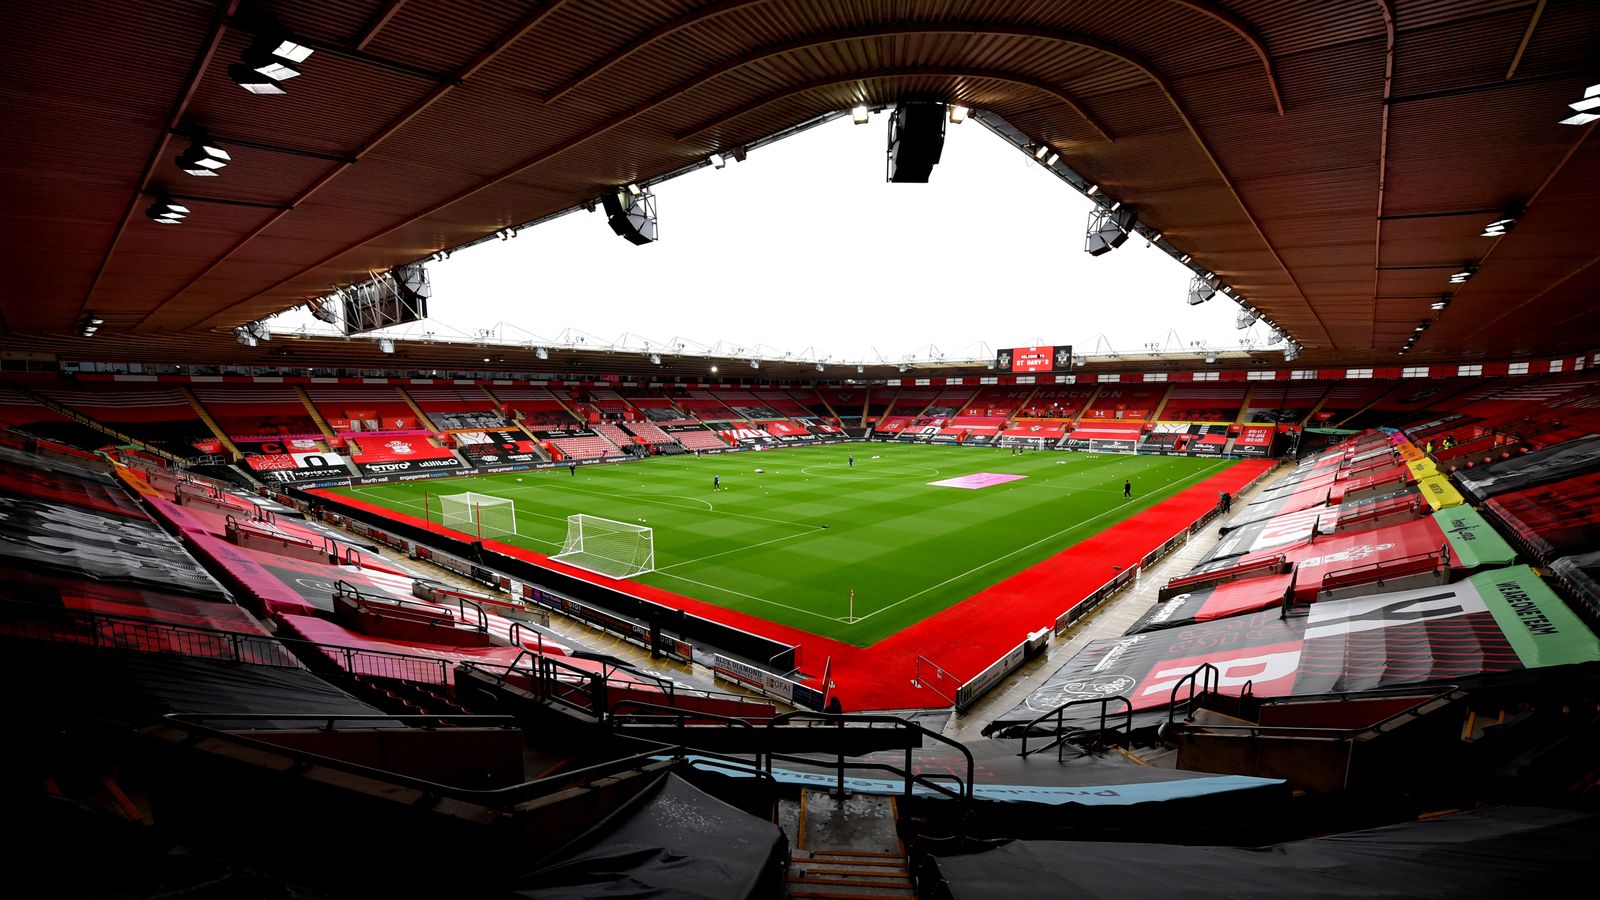 Serbian cable-TV tycoon snaps up Southampton FC in £100m deal